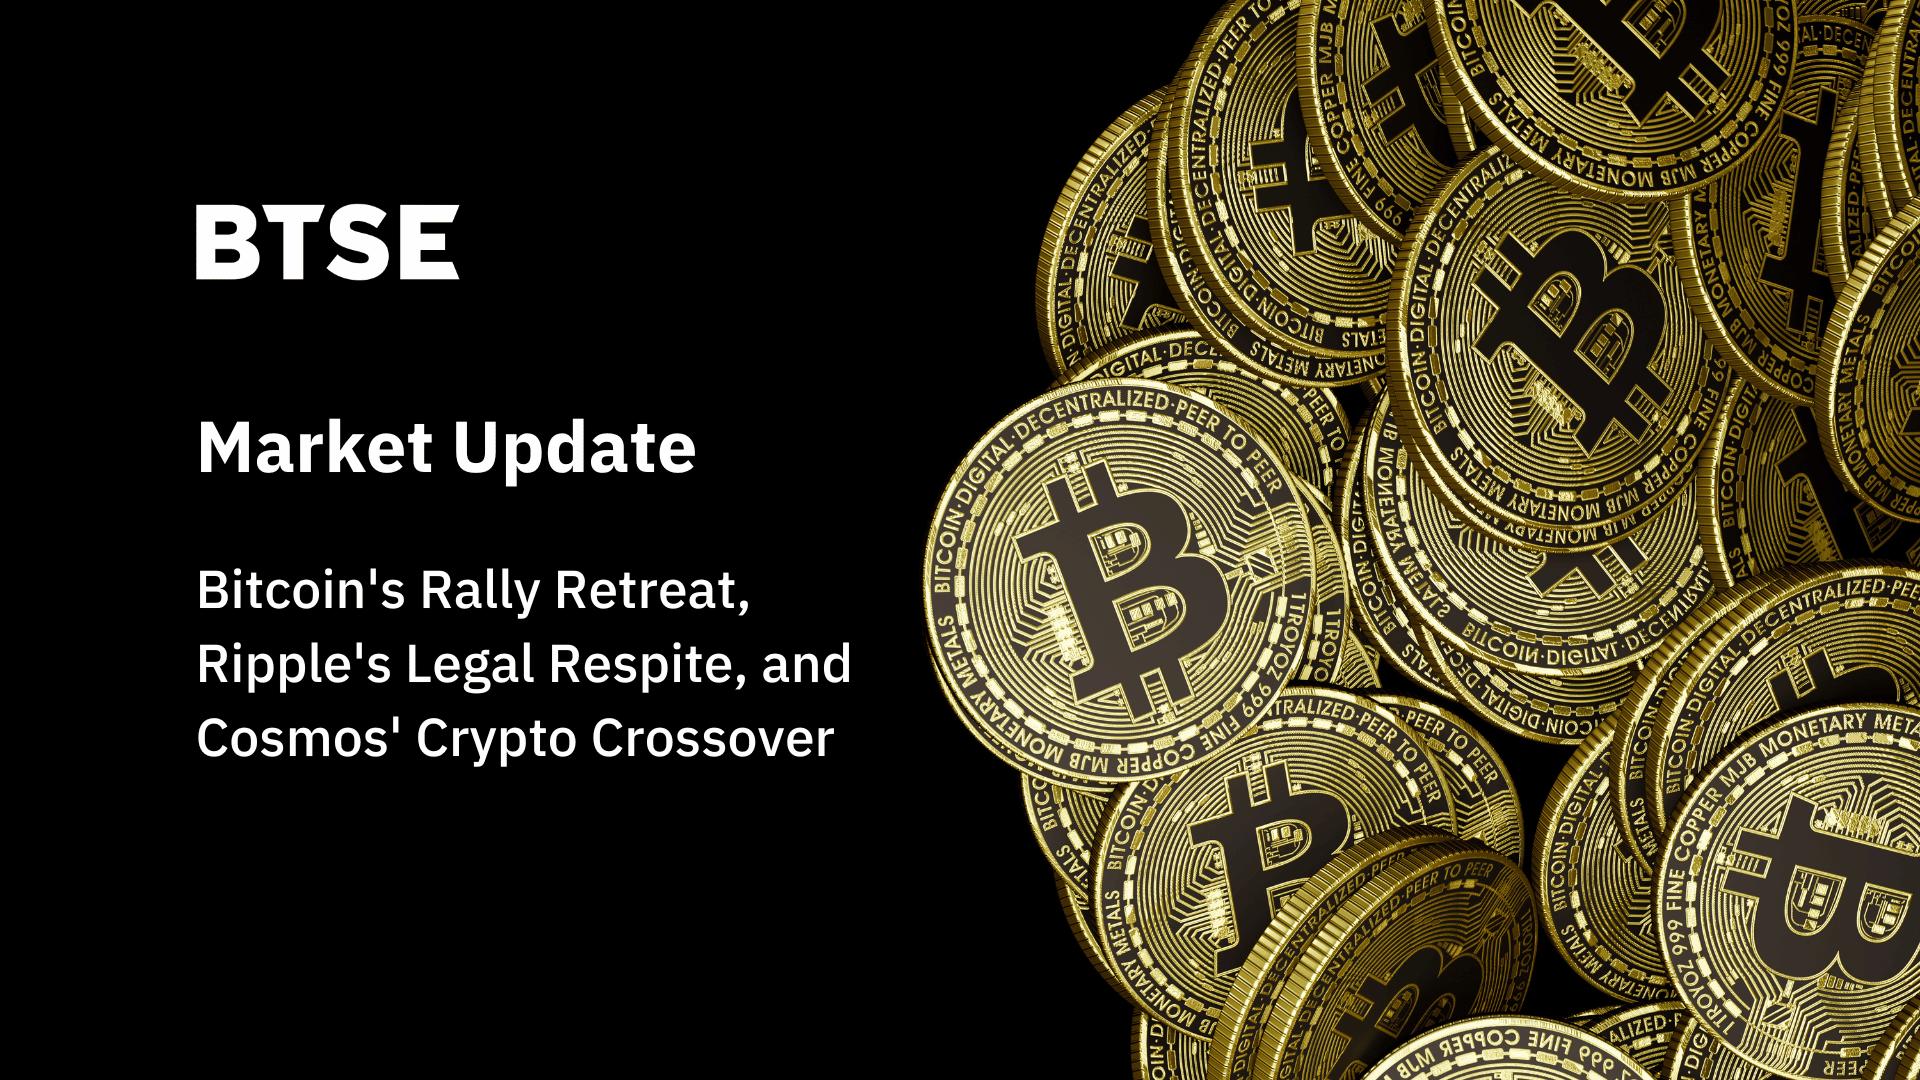 Bitcoin’s Rally Retreat, Ripple’s Legal Respite, and Cosmos’ Crypto Crossover